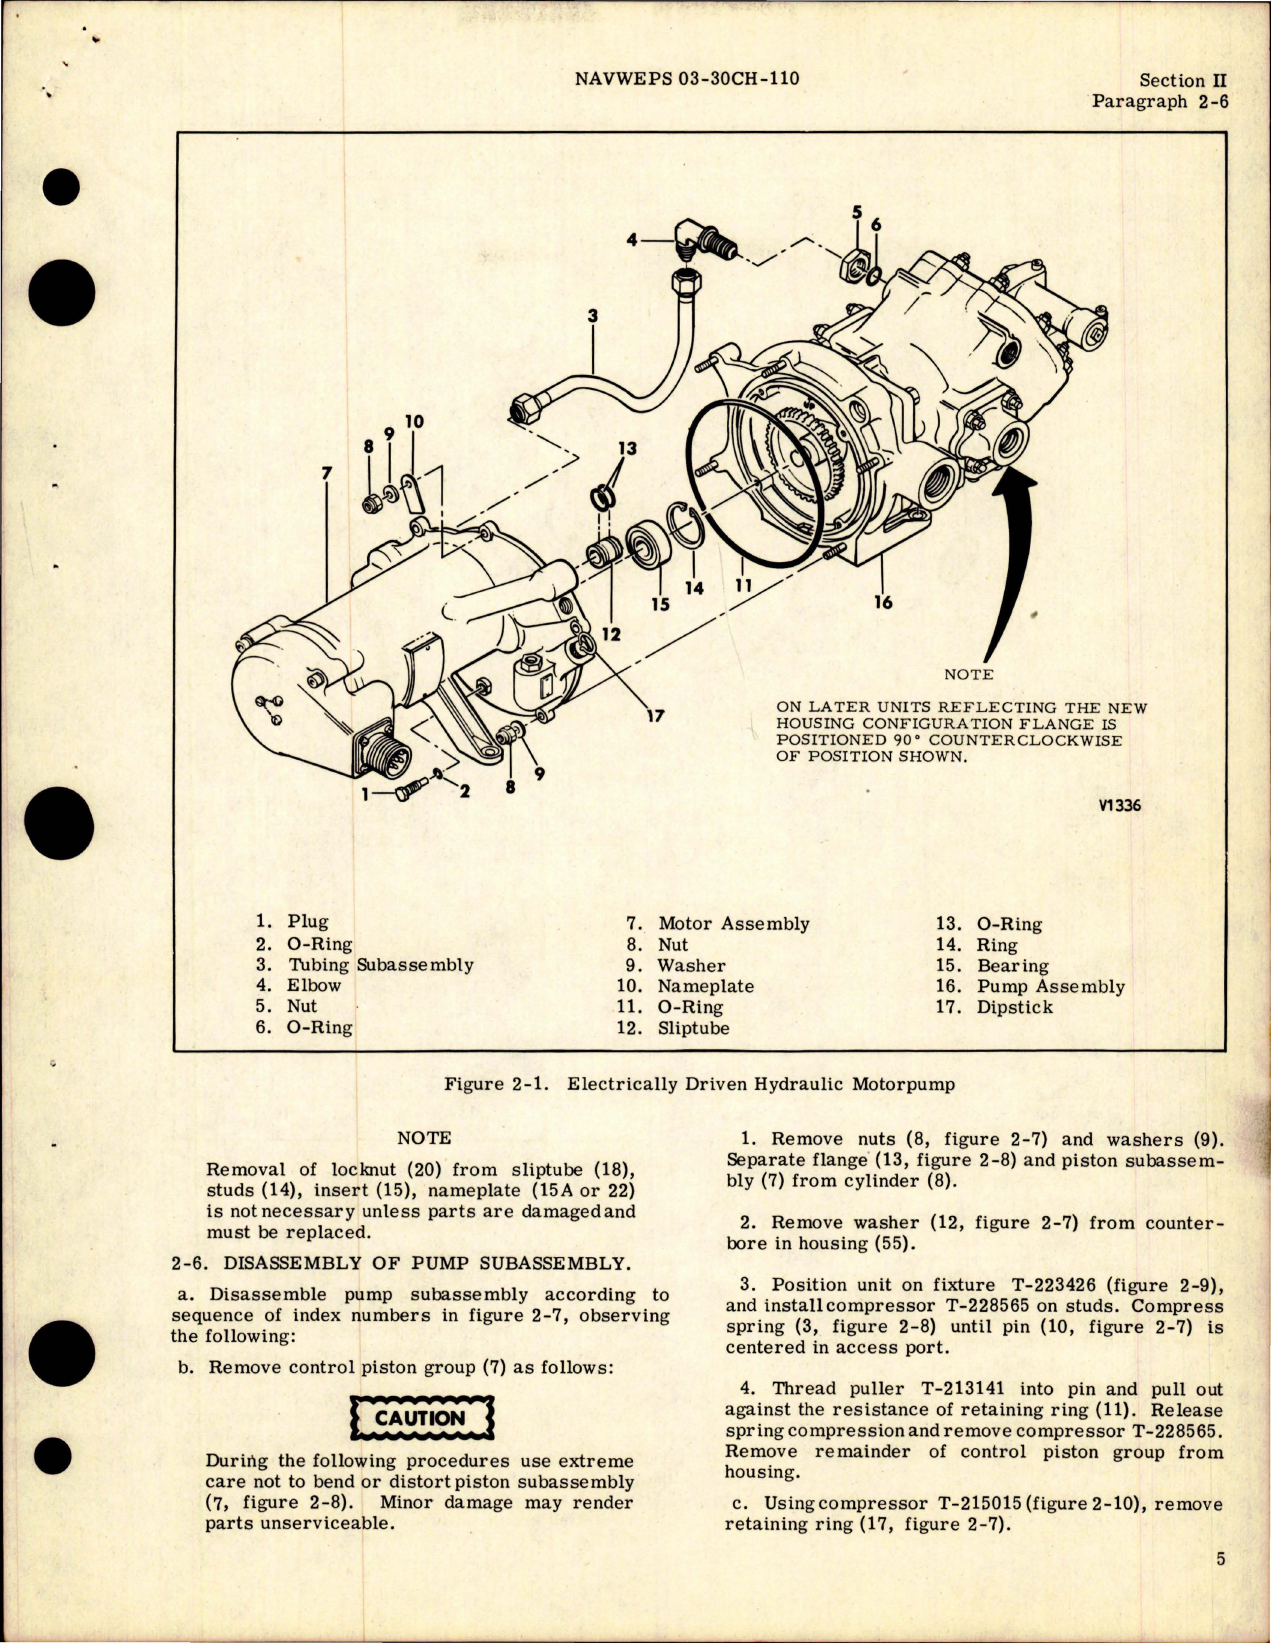 Sample page 5 from AirCorps Library document: Overhaul Instructions for Electrically Driven Hydraulic Motorpump - Model EA-1045-037-1A 